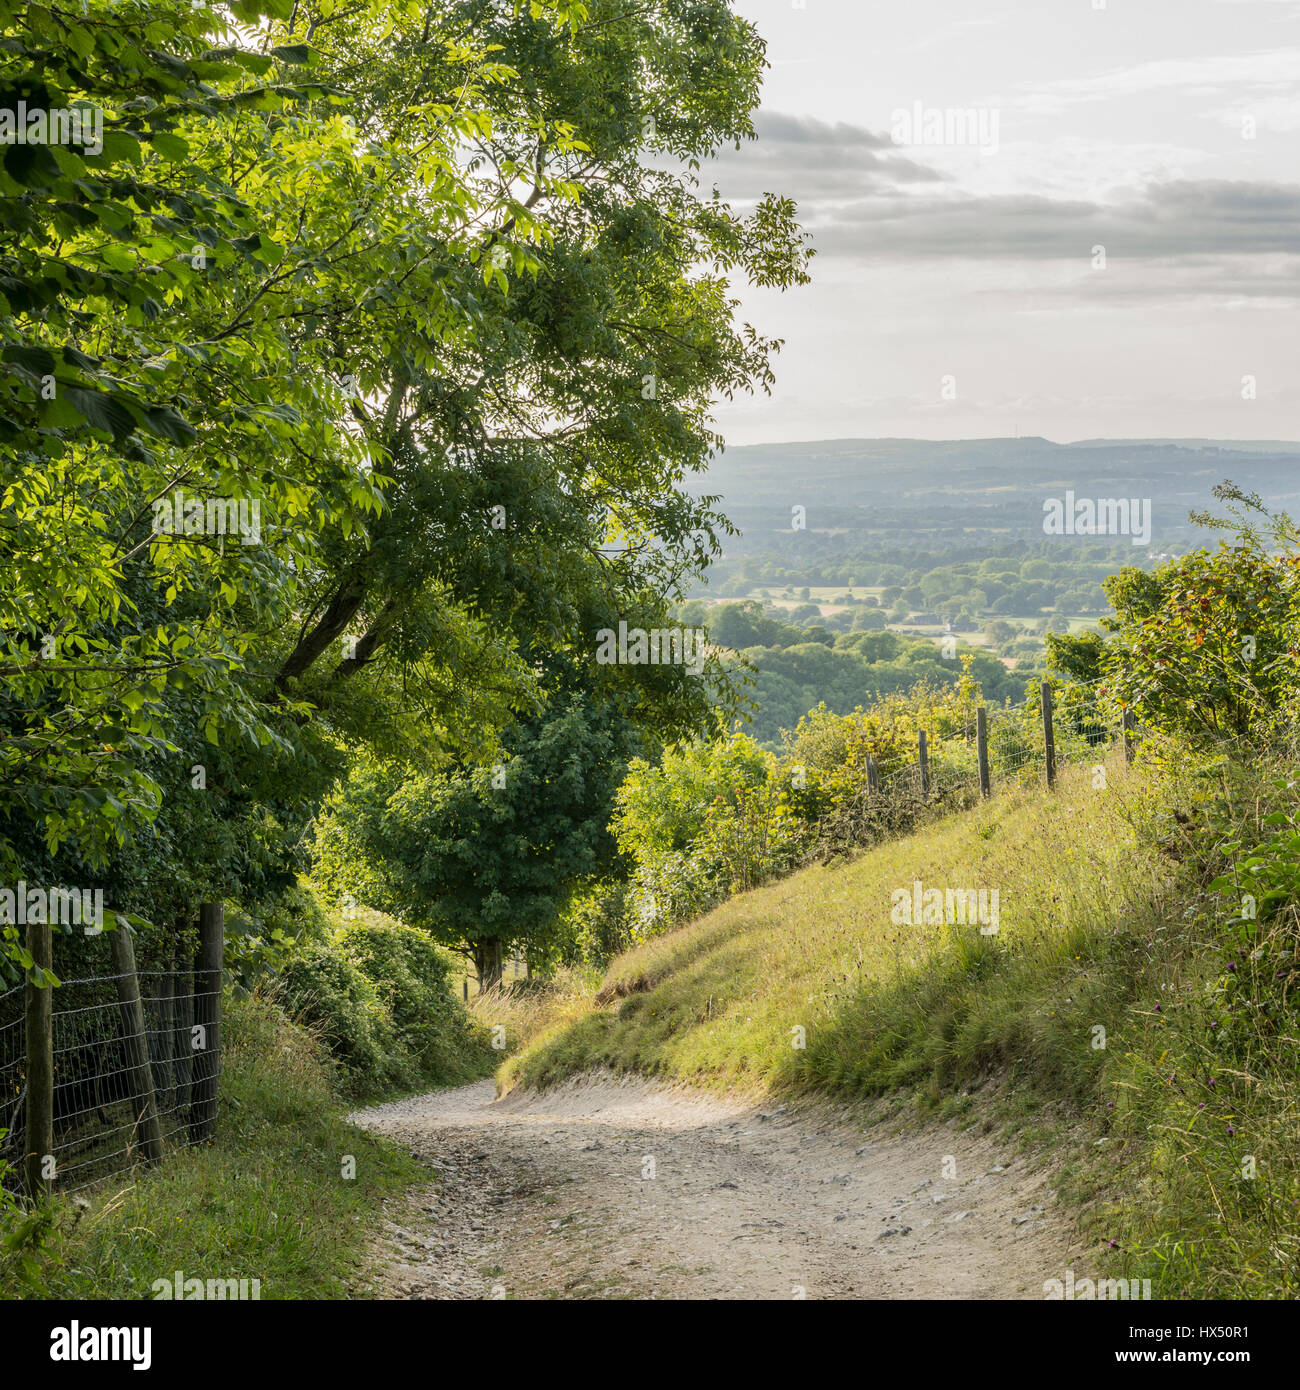 The South Downs Way leading down from Chanctonbury Ring in the South Downs National Park, West Sussex, England, UK. Stock Photo